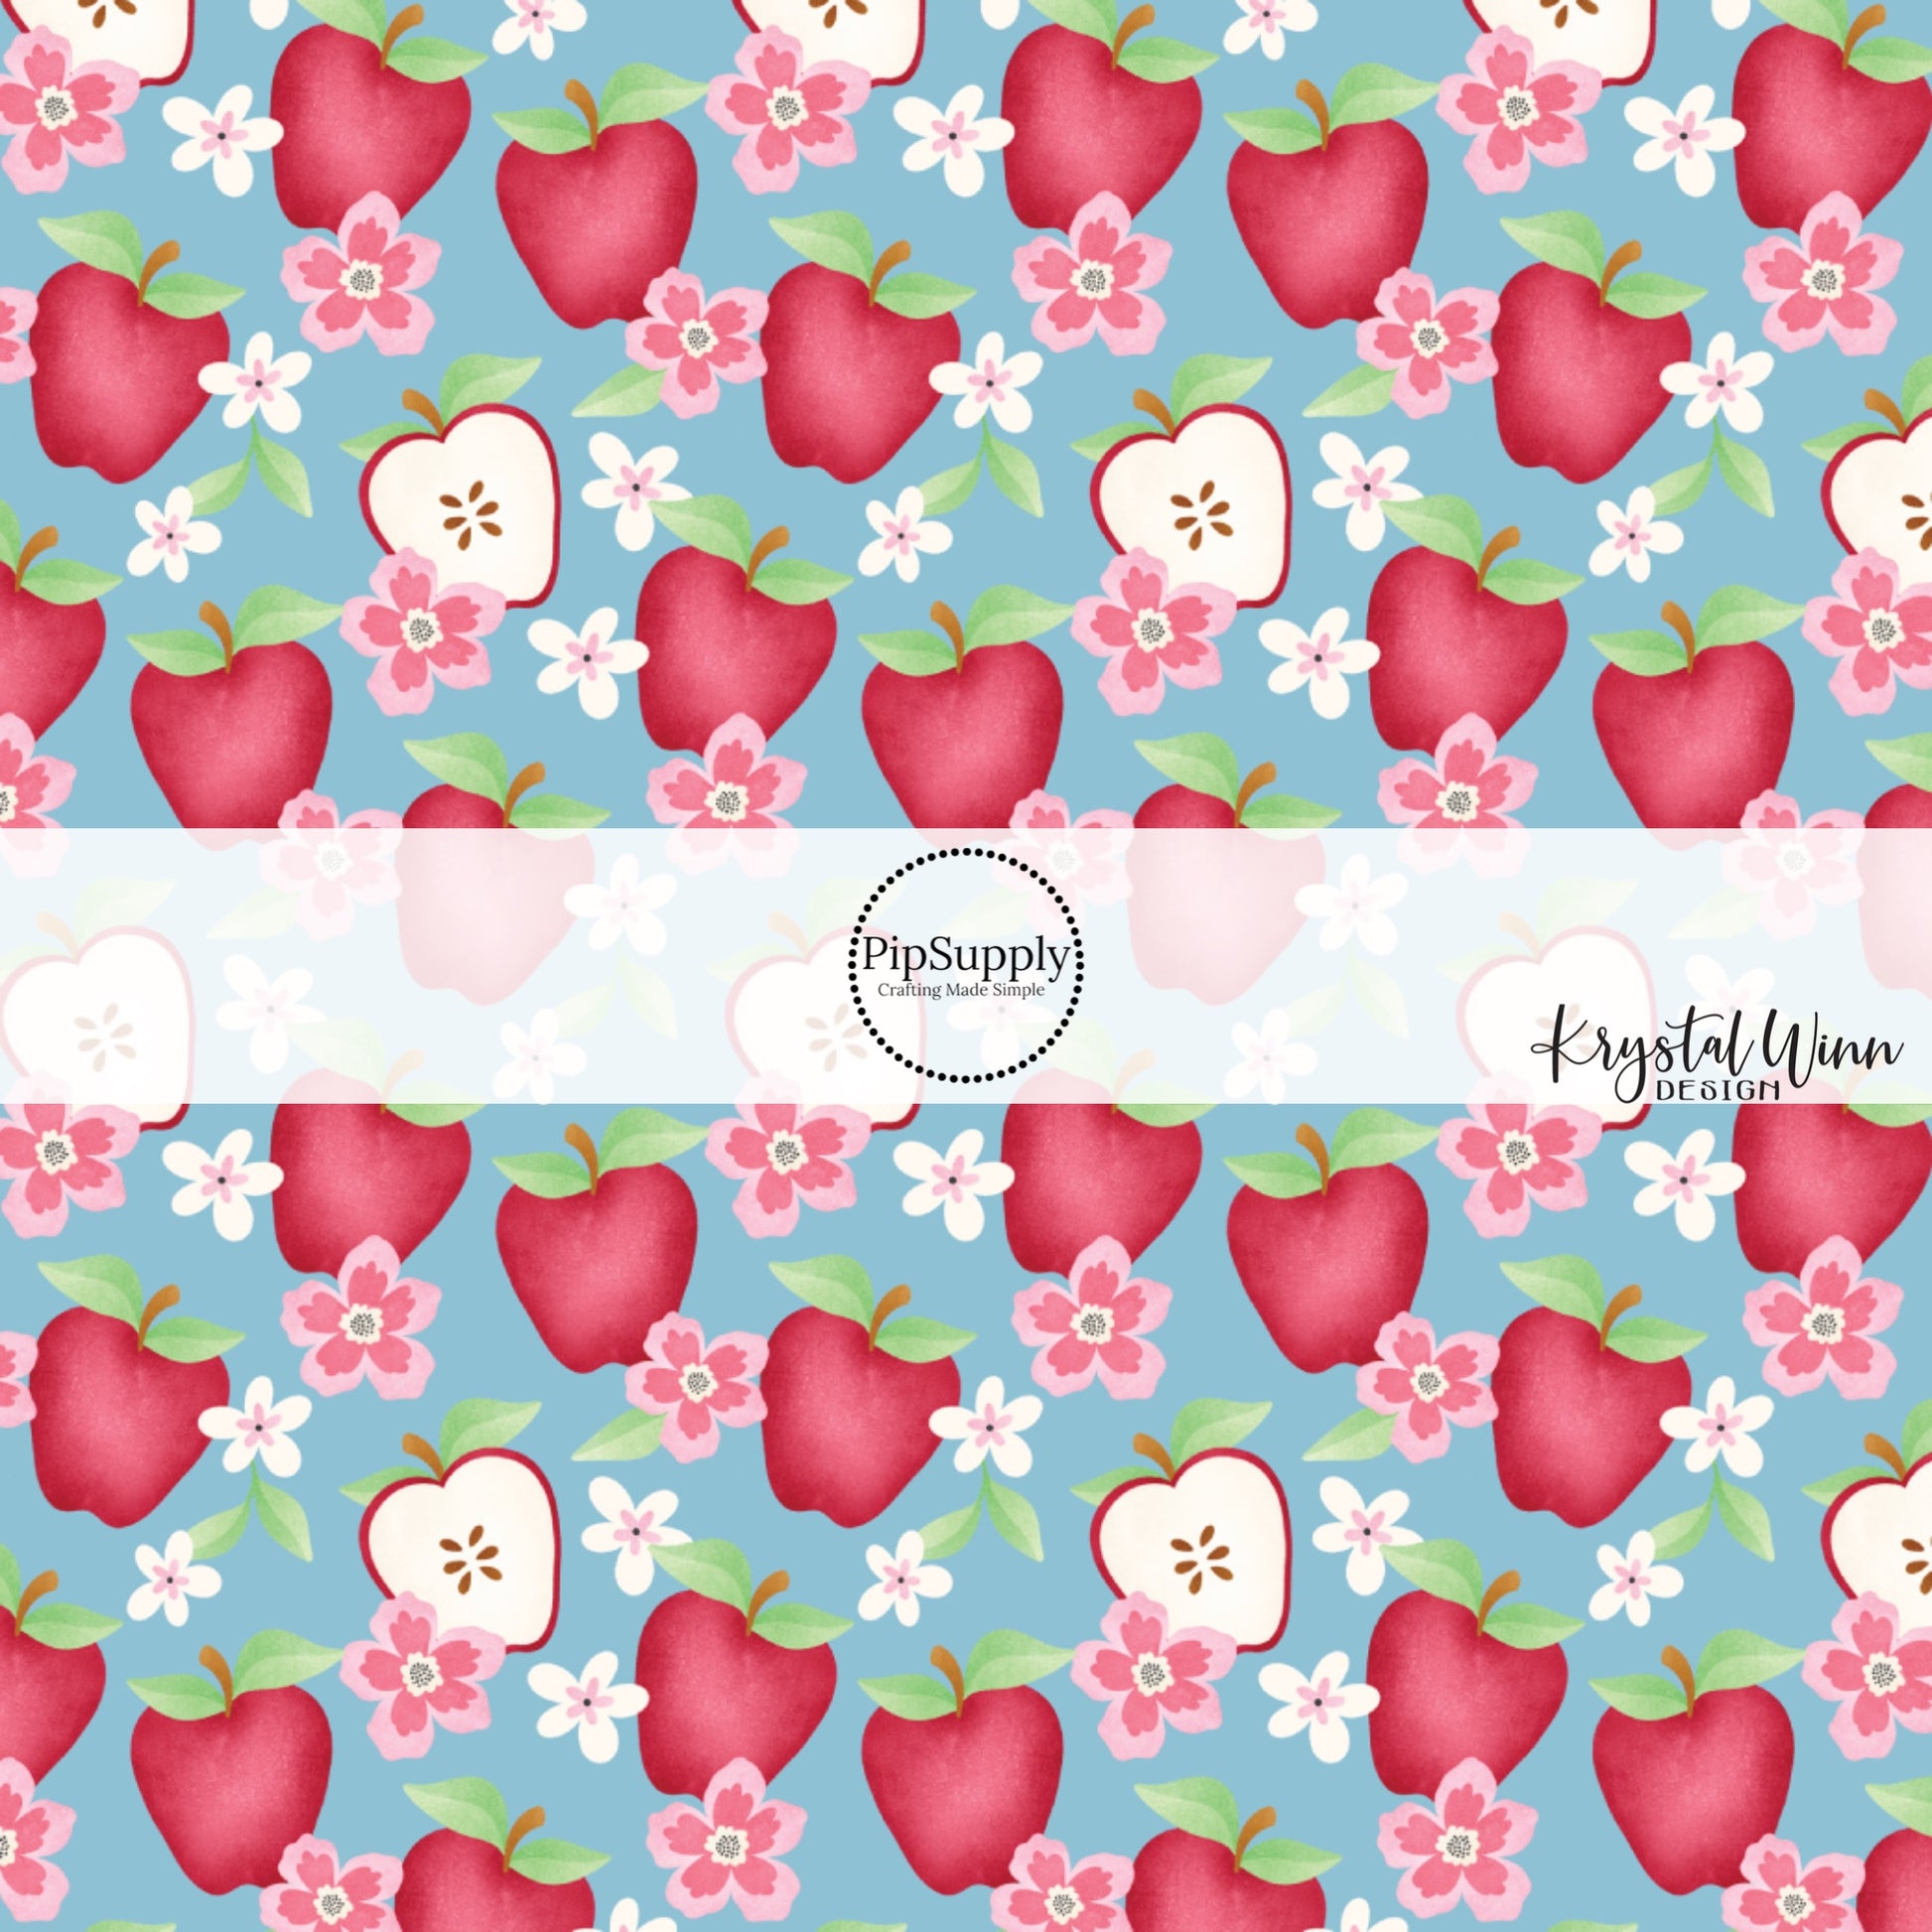 These fall apples themed blue fabric by the yard features red apples and apple slices with small flowers on blue. This fun fall themed fabric can be used for all your sewing and crafting needs! 